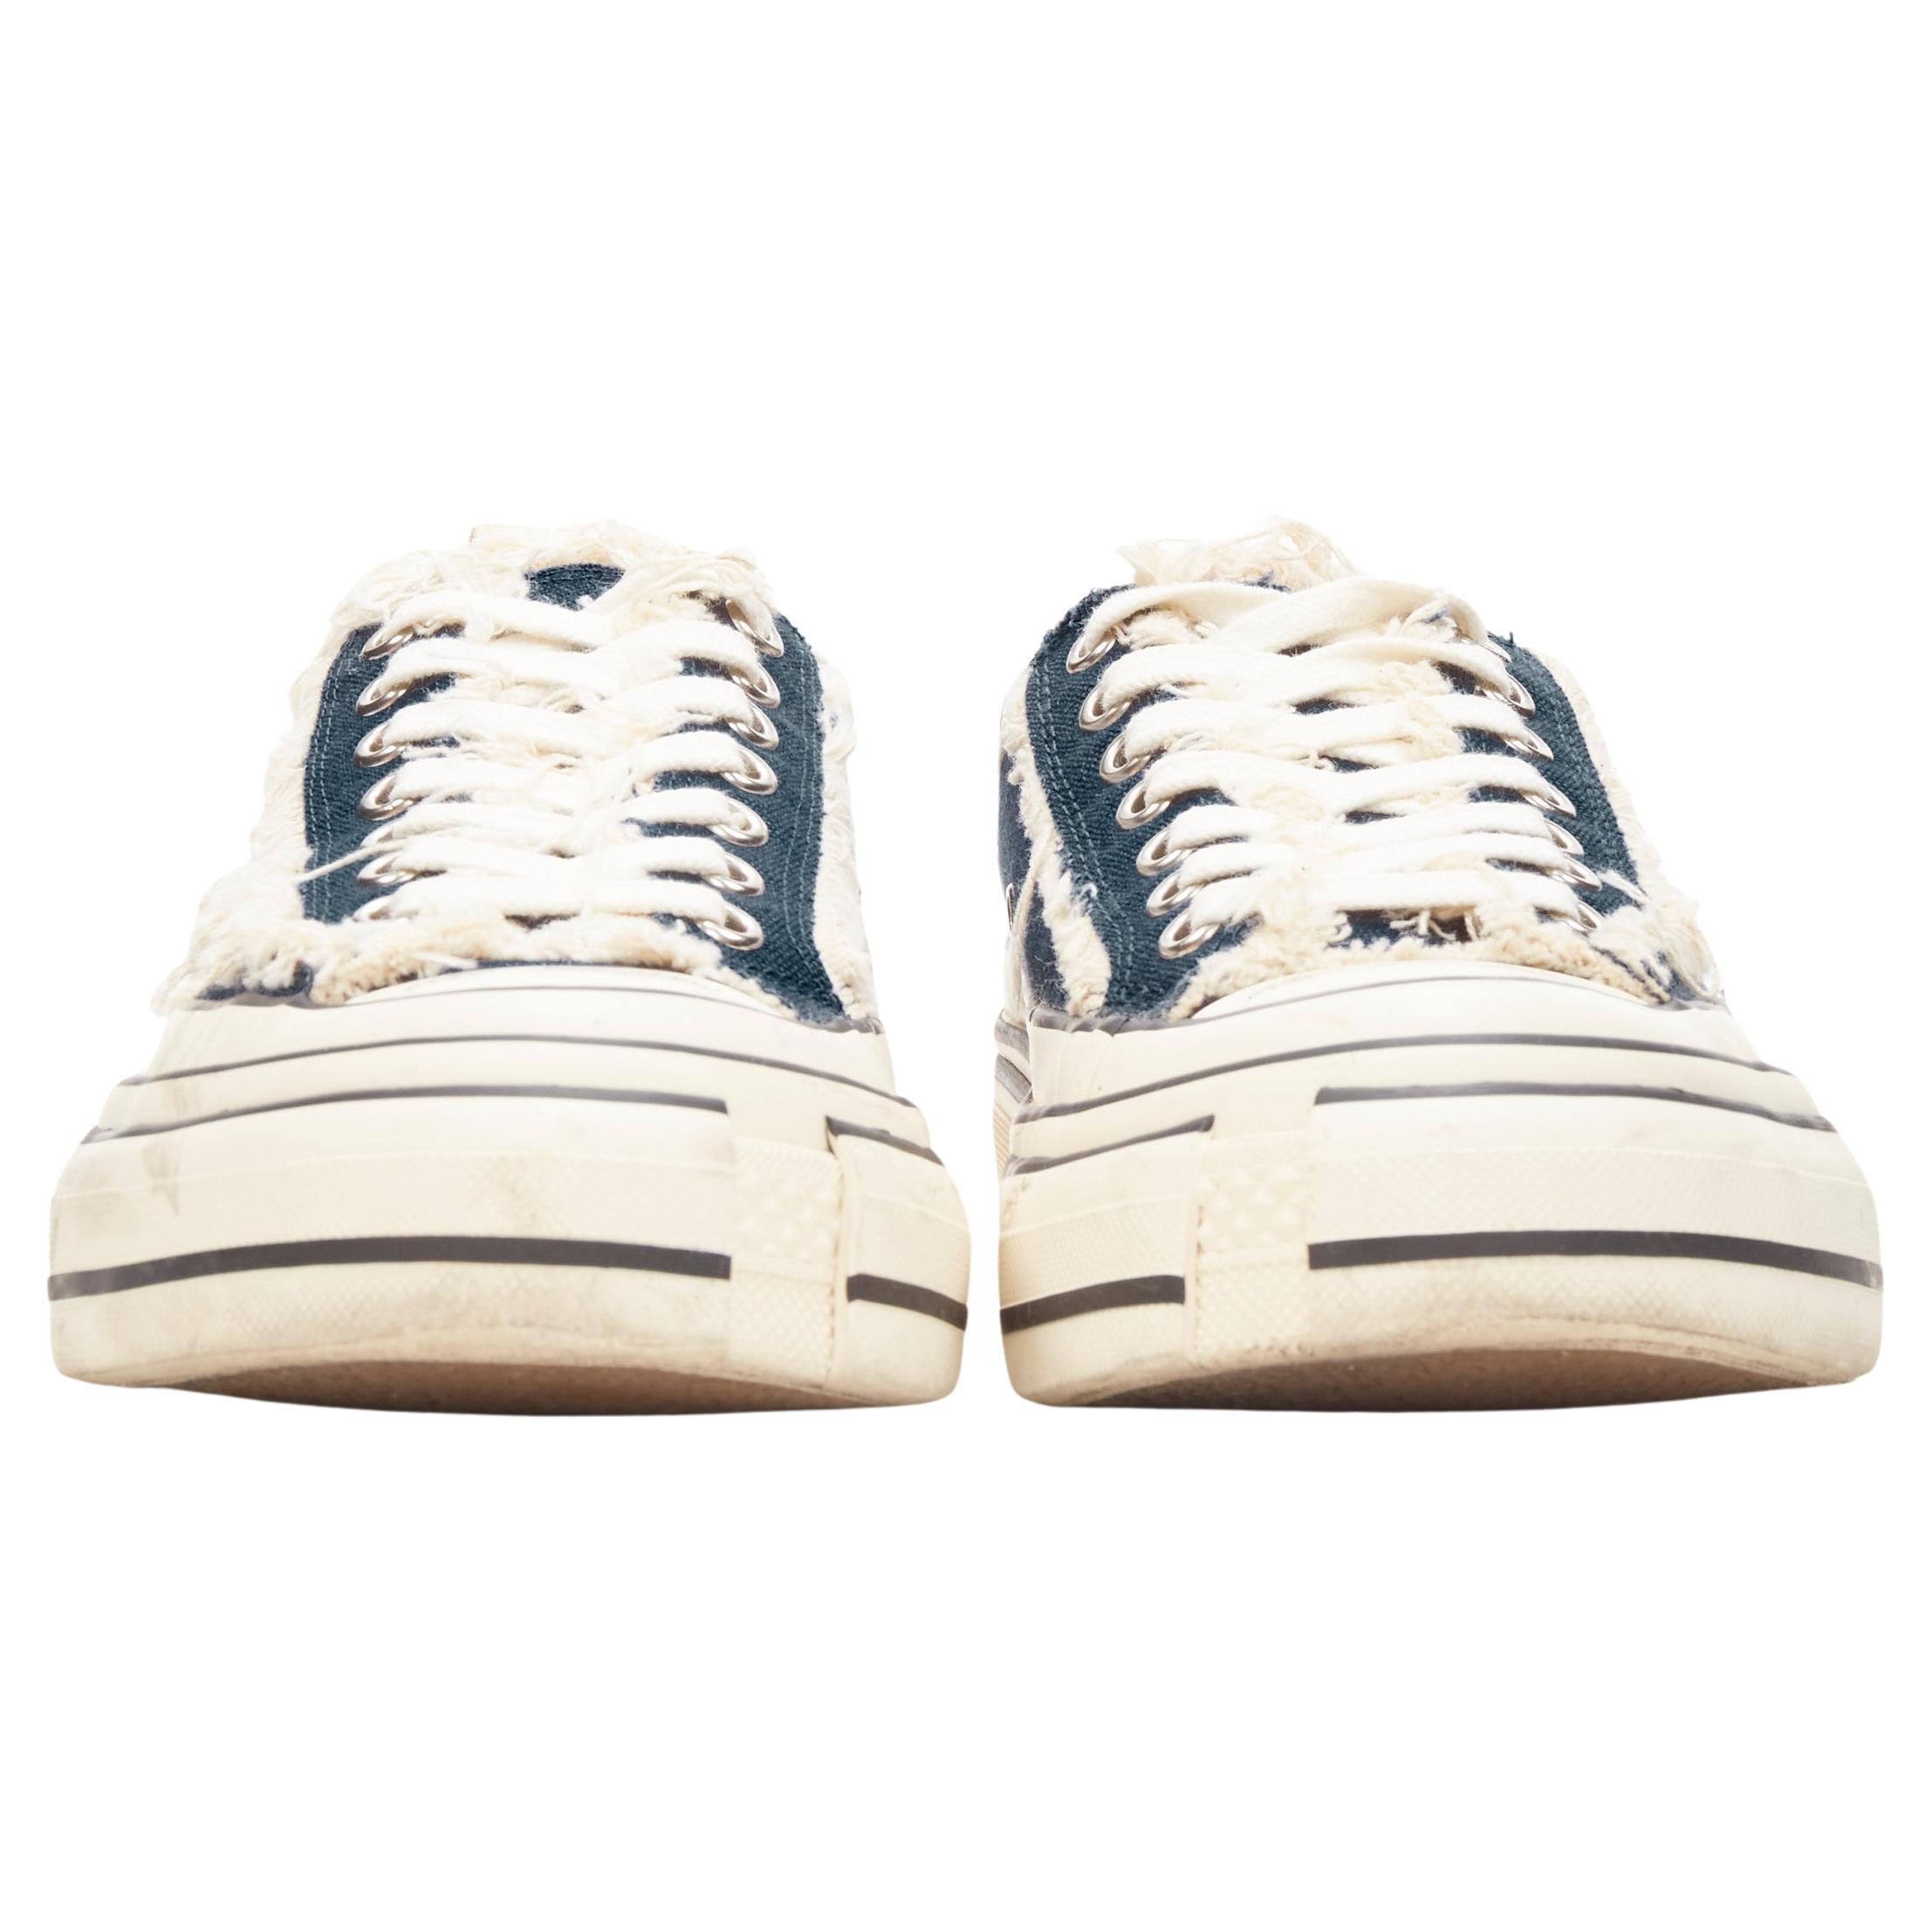 XVESSEL G.O.P. Lows blue denim deconstructed distressed sneakers EU37 US7
Brand: XVessel
Model: GOP Lows
Material: Denim
Color: Blue
Pattern: Solid
Closure: Lace Up

CONDITION:
Condition: Very good, this item was pre-owned and is in very good